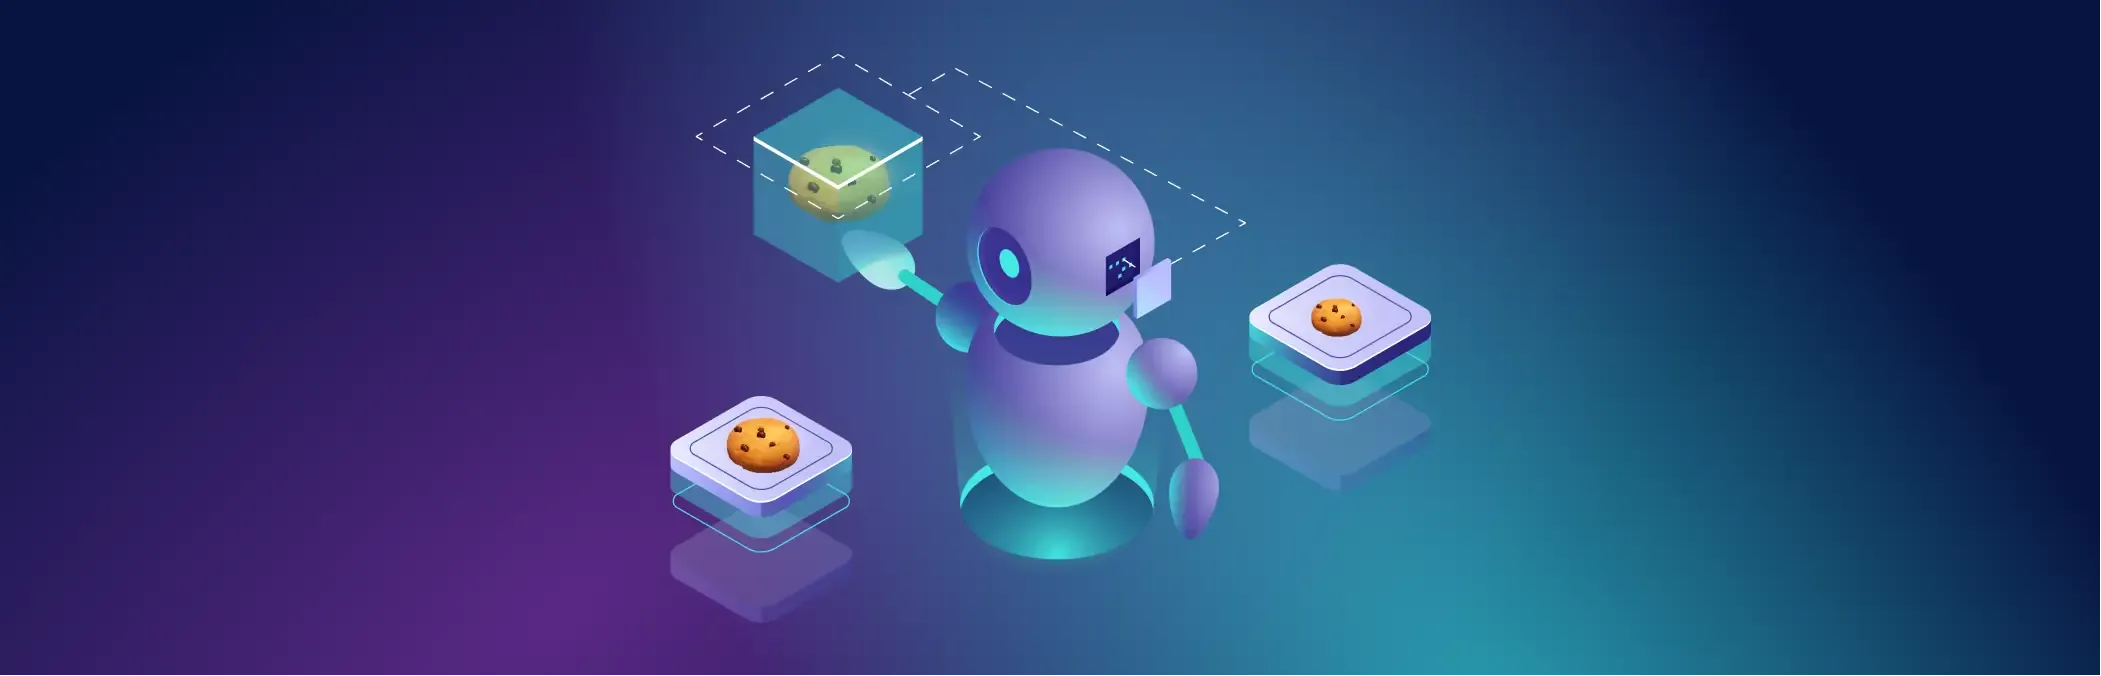 How to Use Cookies Bot in Undetectable: Setup and Functionality